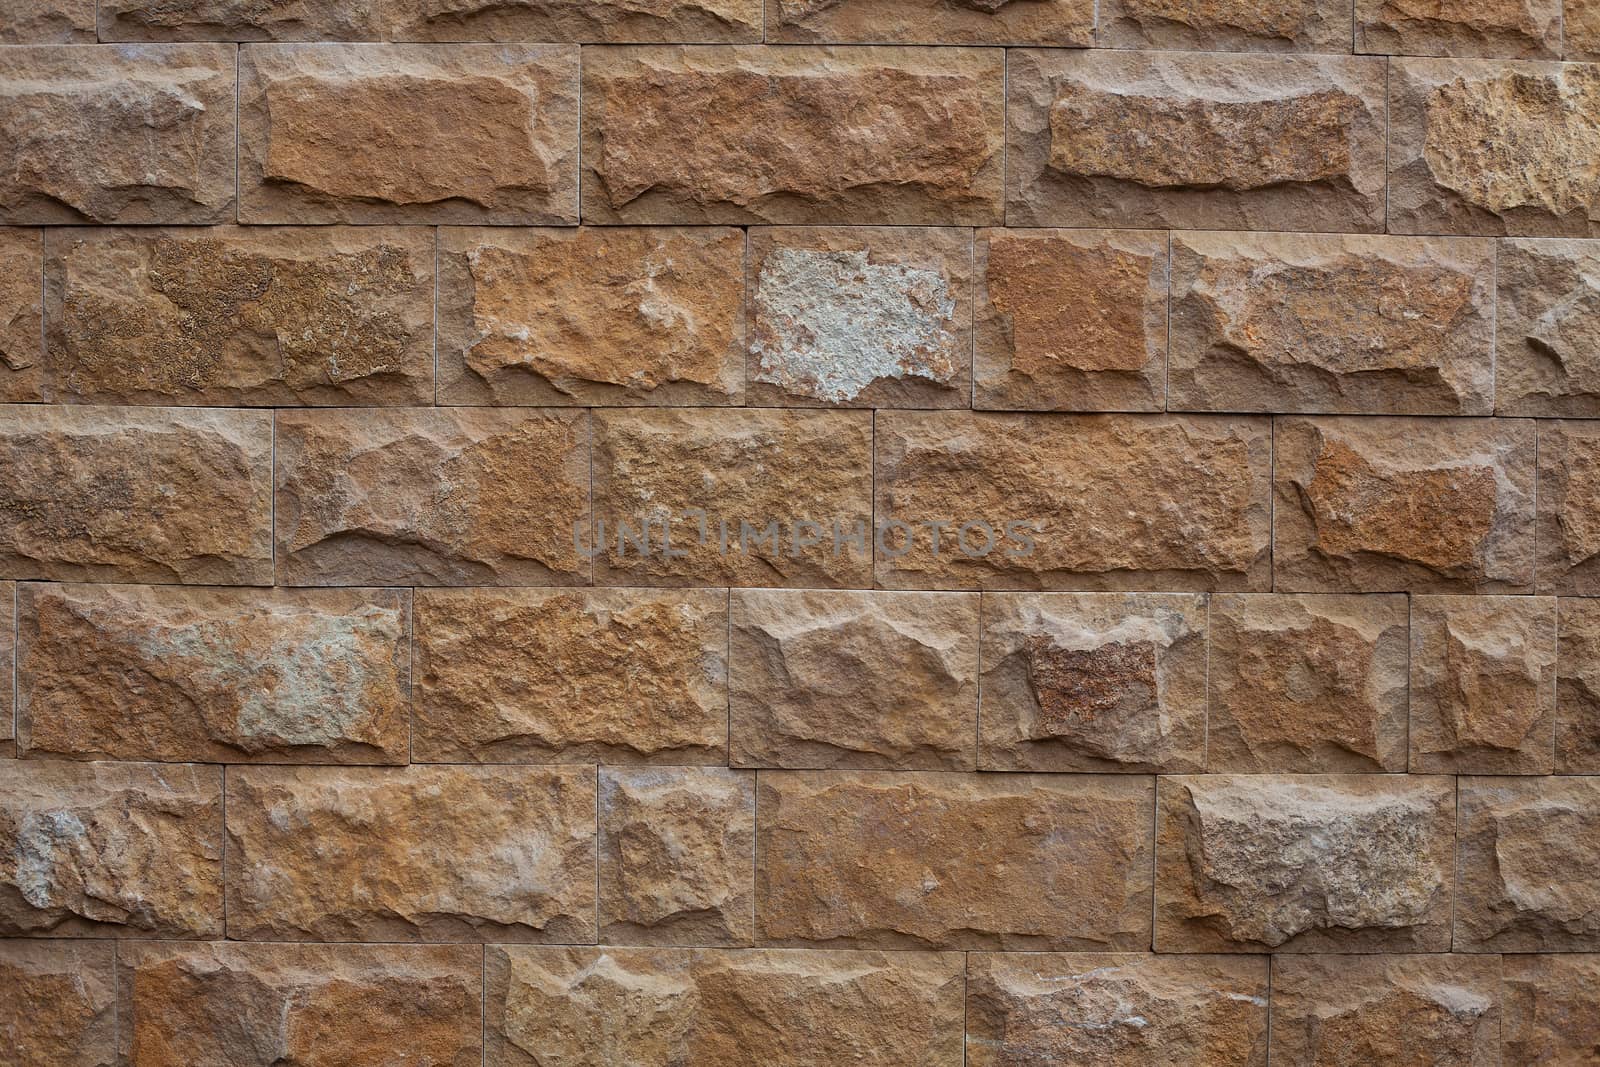 Texture of sandstone wall